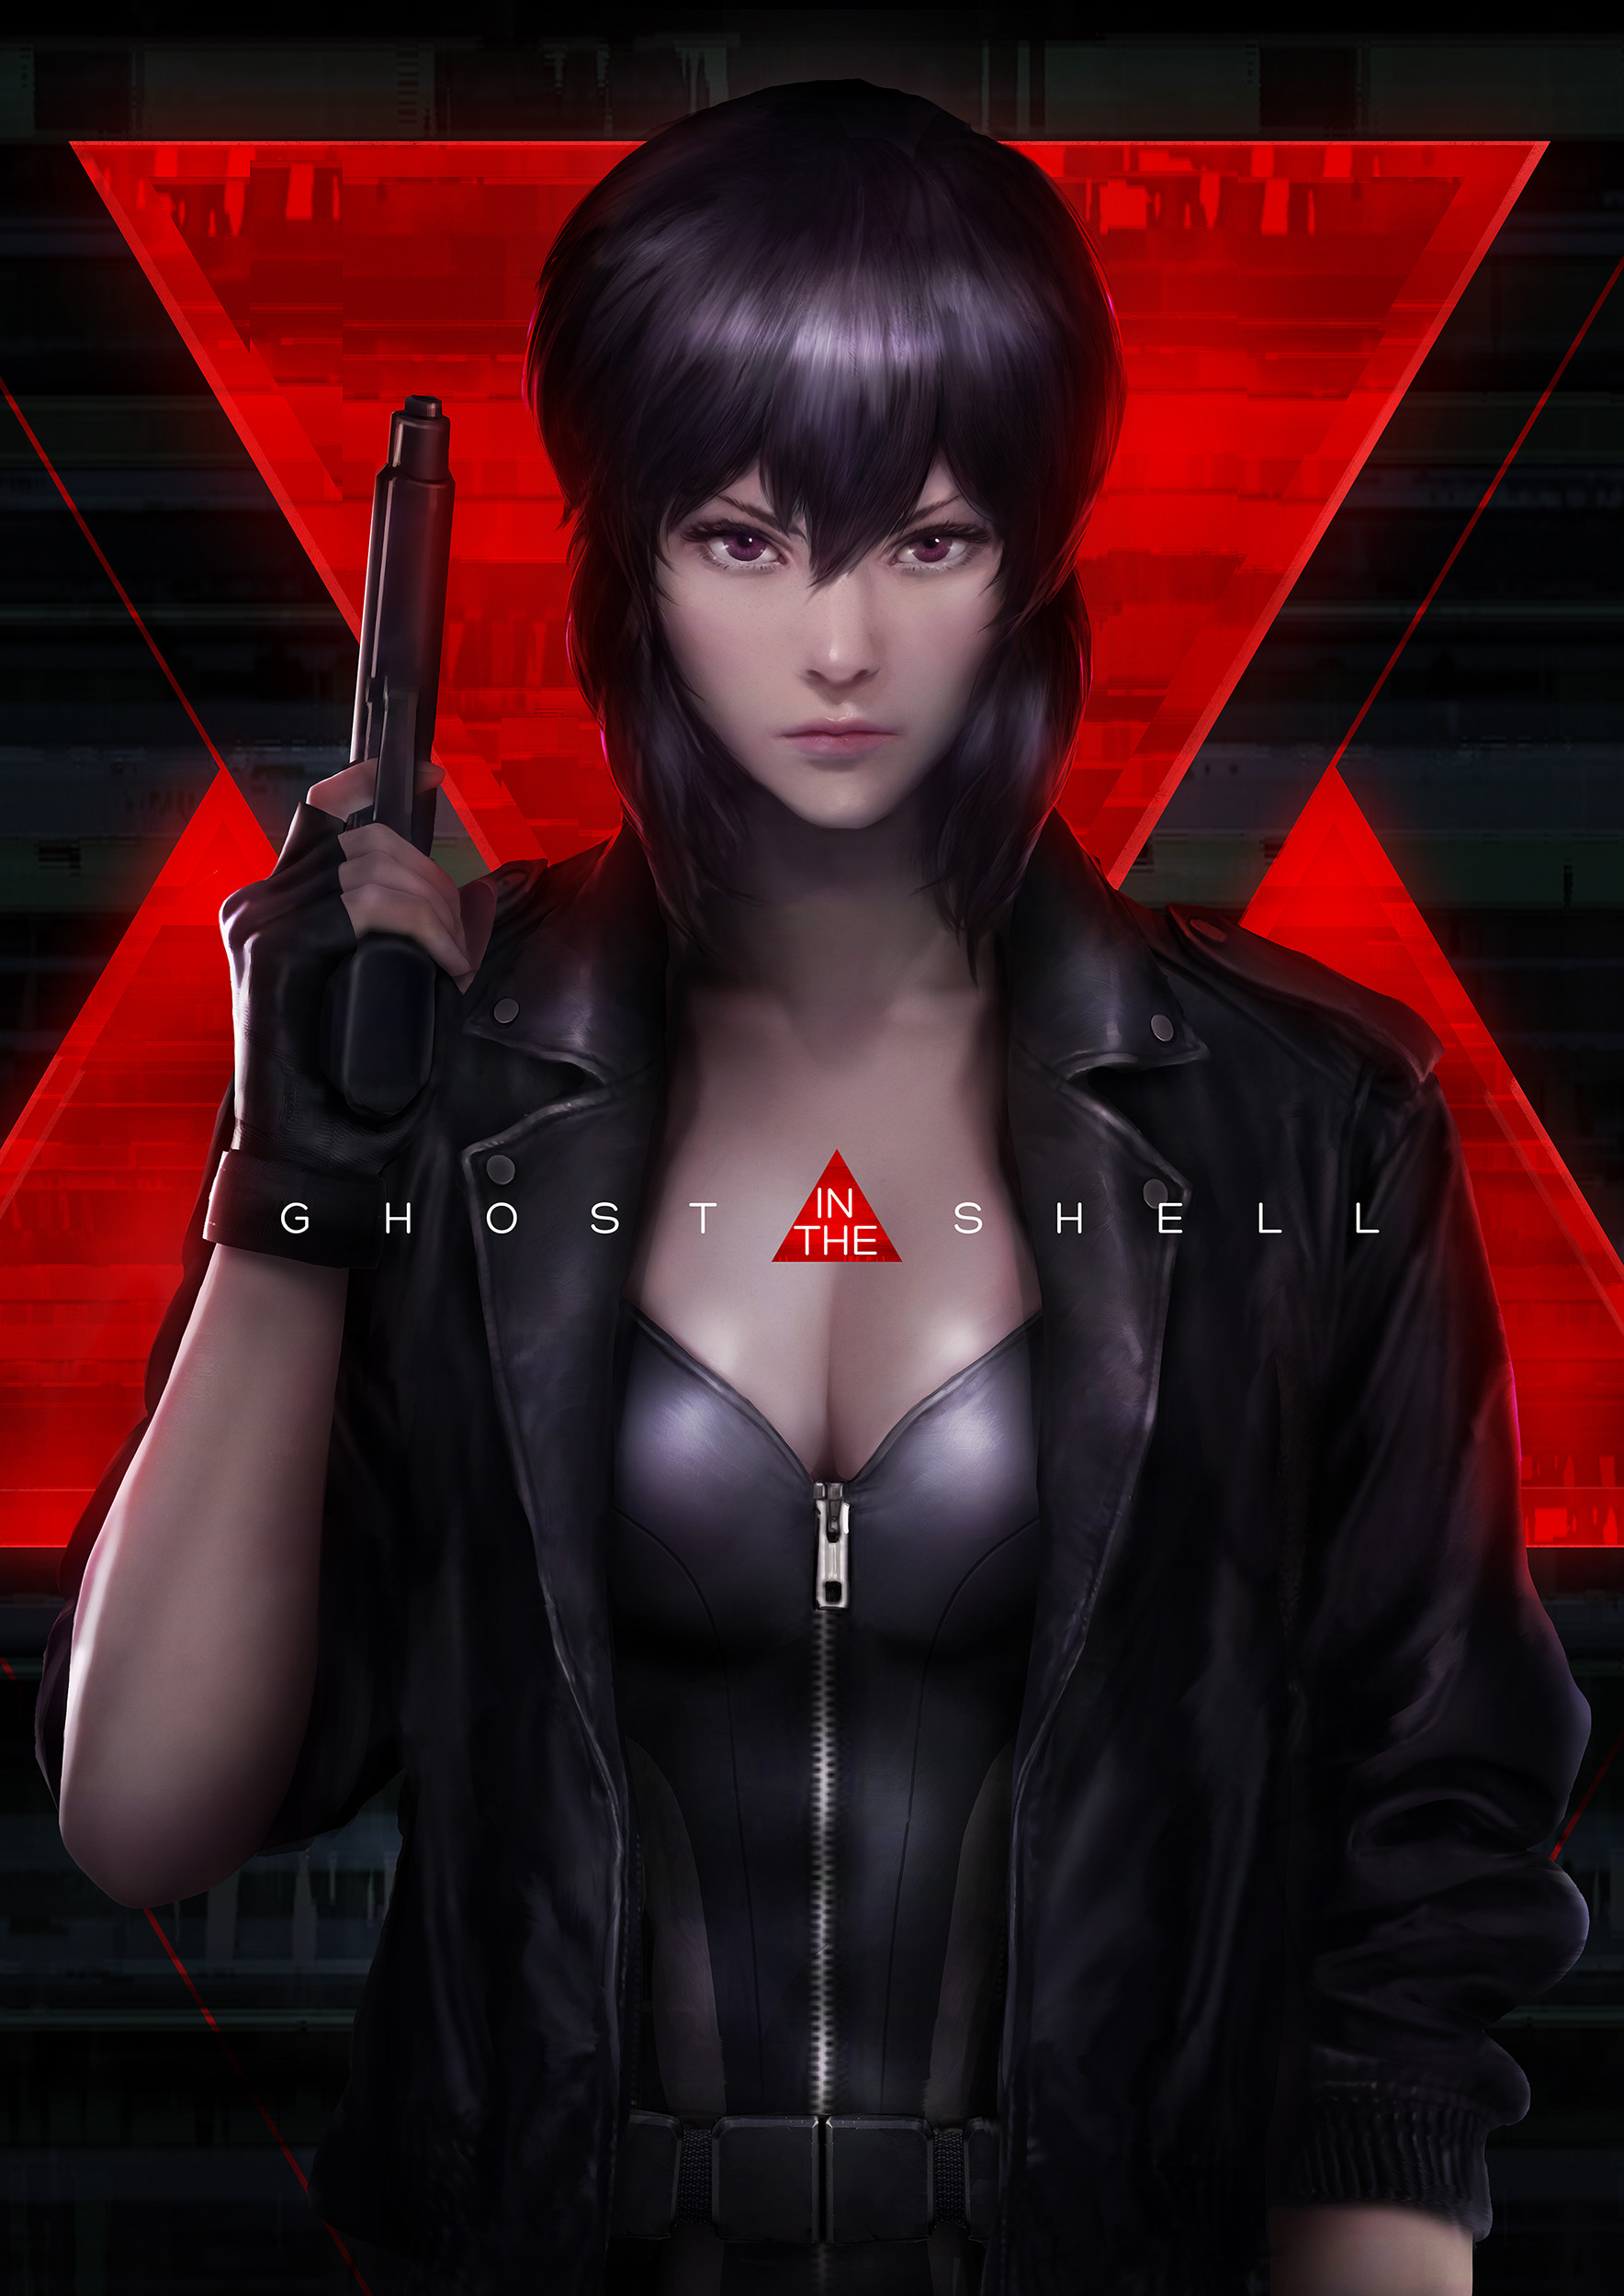 Inspiration hebdomadaire spéciale Ghost in the shell en digital painting